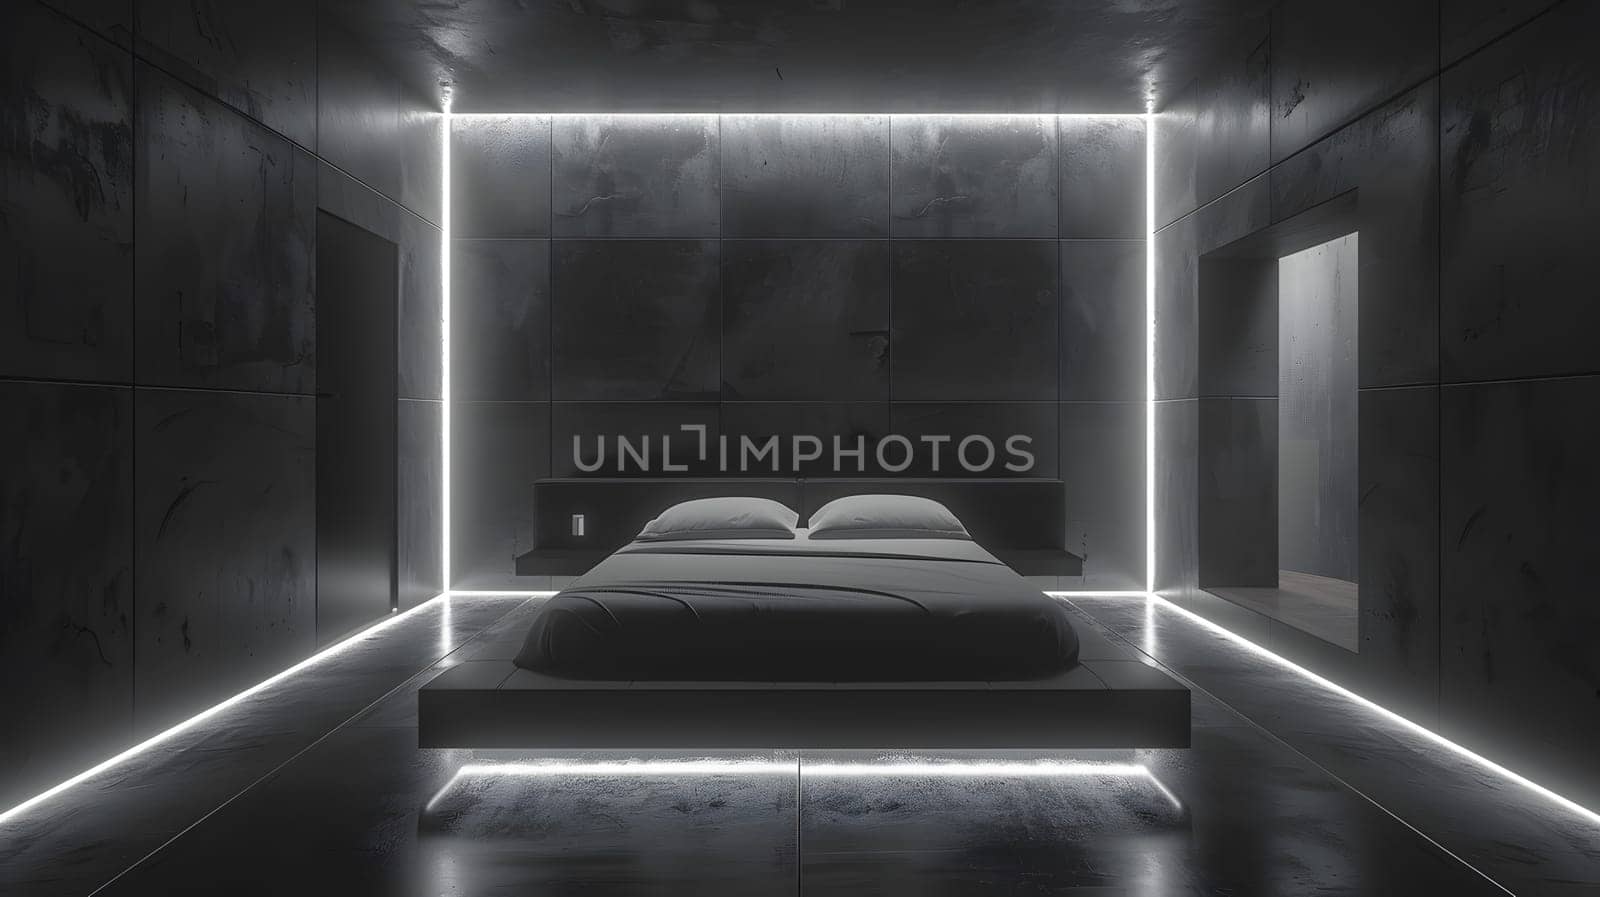 A monochrome bedroom featuring a metal bed and Automotive lighting with neon lights on the walls and ceiling, creating a symmetrical and futuristic ambiance in the darkness